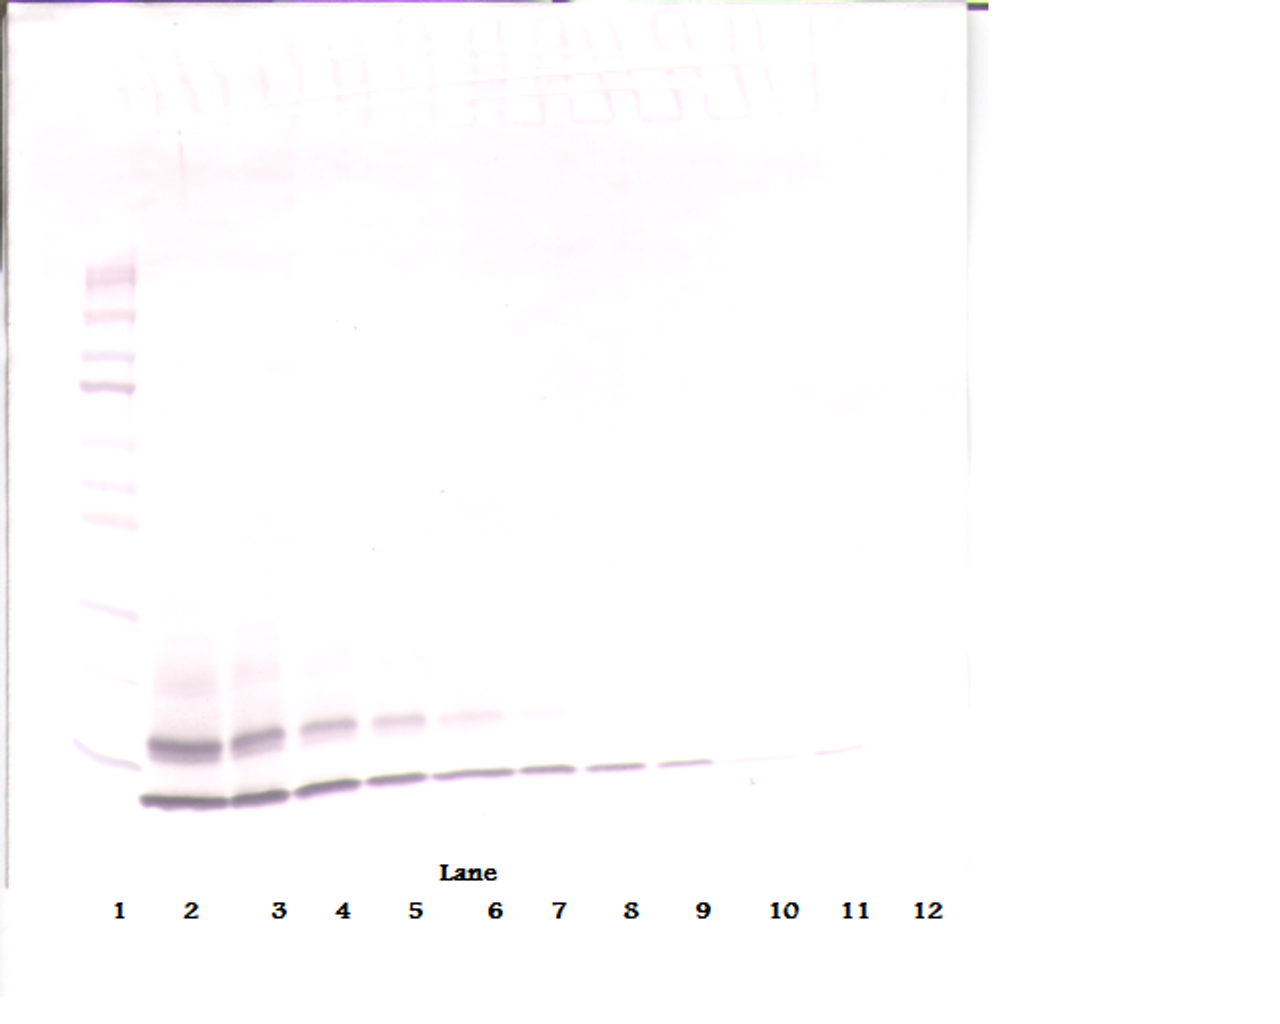 To detect Human MIP-1-beta by Western Blot analysis this antibody can be used at a concentration of 0.1 - 0.2 ug/ml. When used in conjunction with compatible secondary reagents, the detection limit for recombinant Human MIP-1-beta is 1.5 - 3.0 ng/lane, under either reducing or non-reducing conditions.